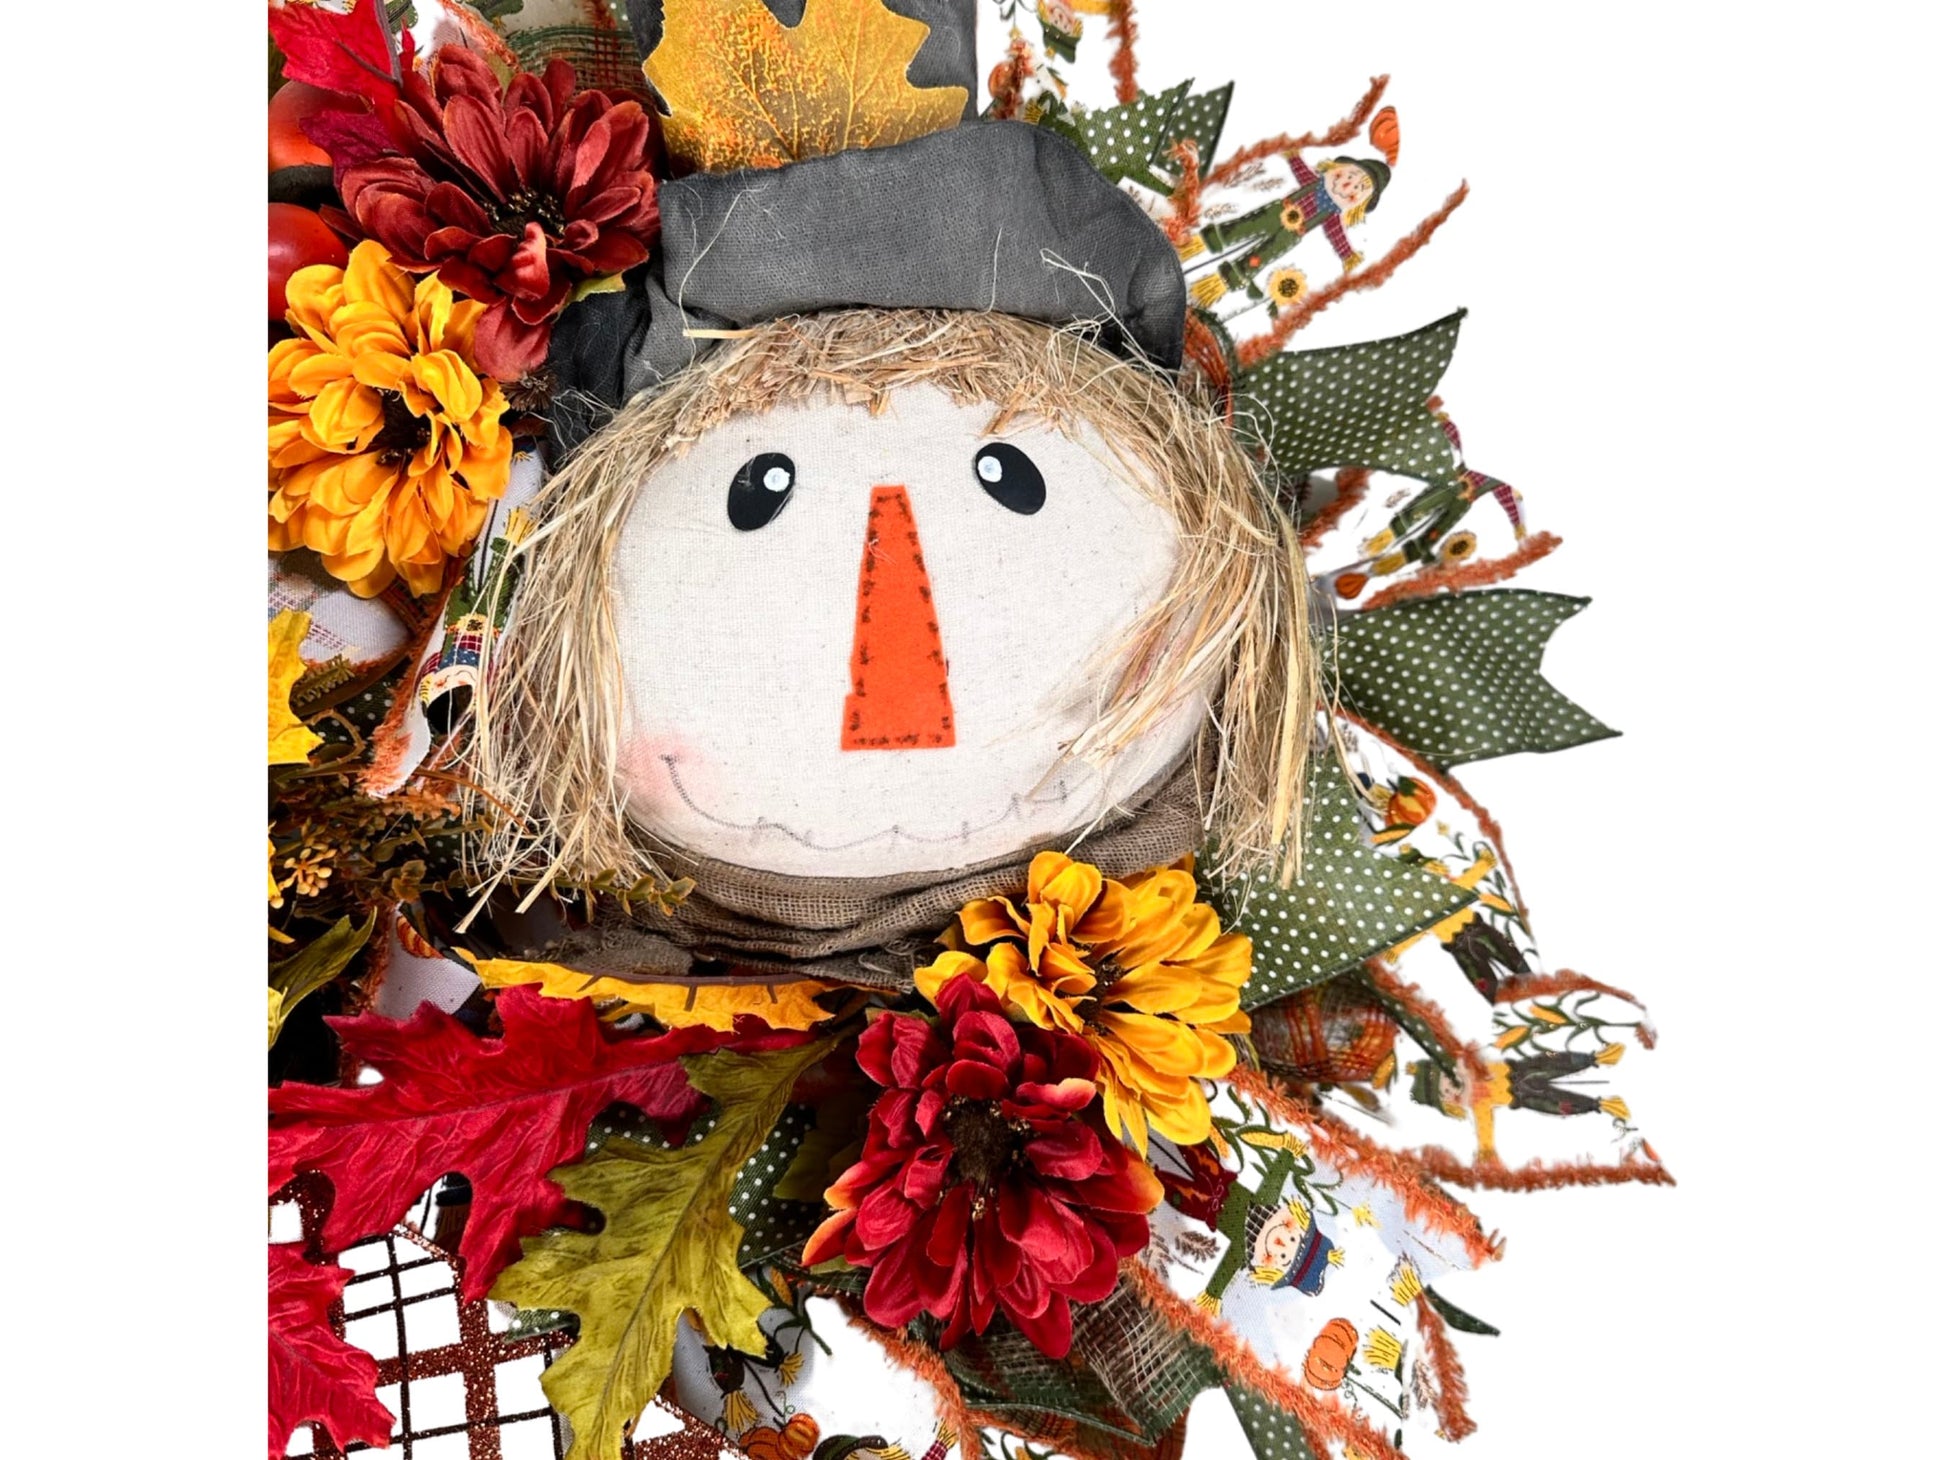 floral fall primitive scarecrow face wreath for September, rustic falling leaves scarecrow front door decor